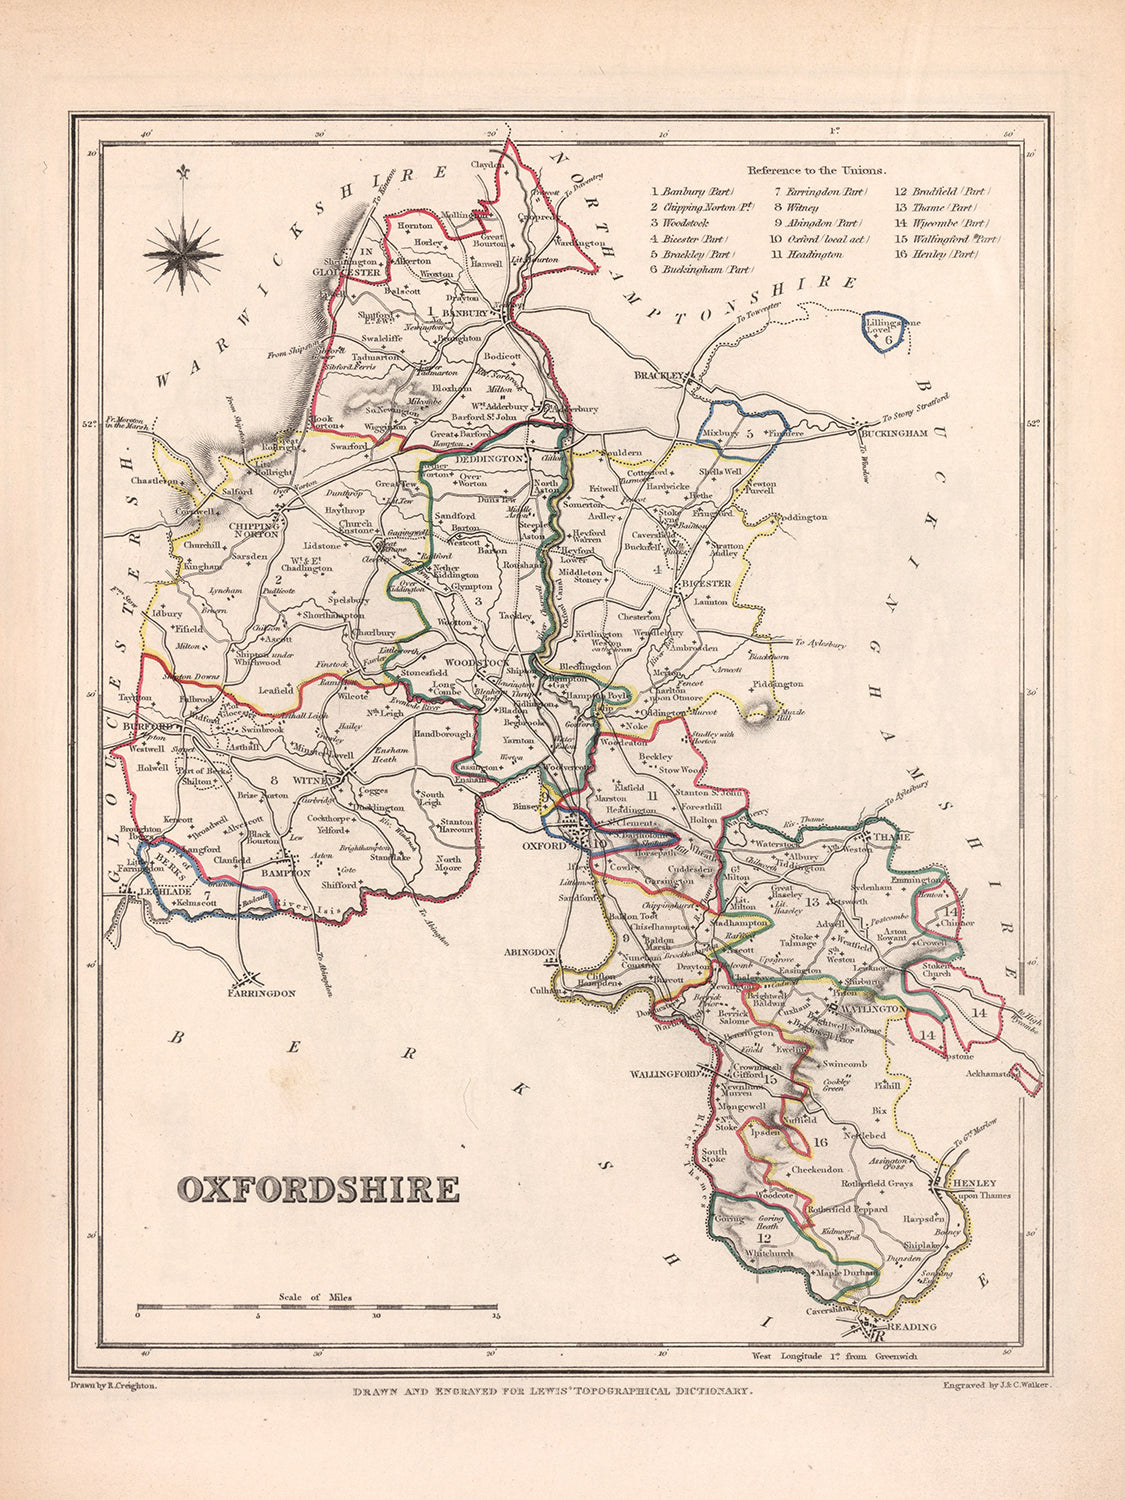 Old Map of Oxfordshire by Samuel Lewis, 1844: Oxford, Banbury, Abingdon, Bicester, and Witney